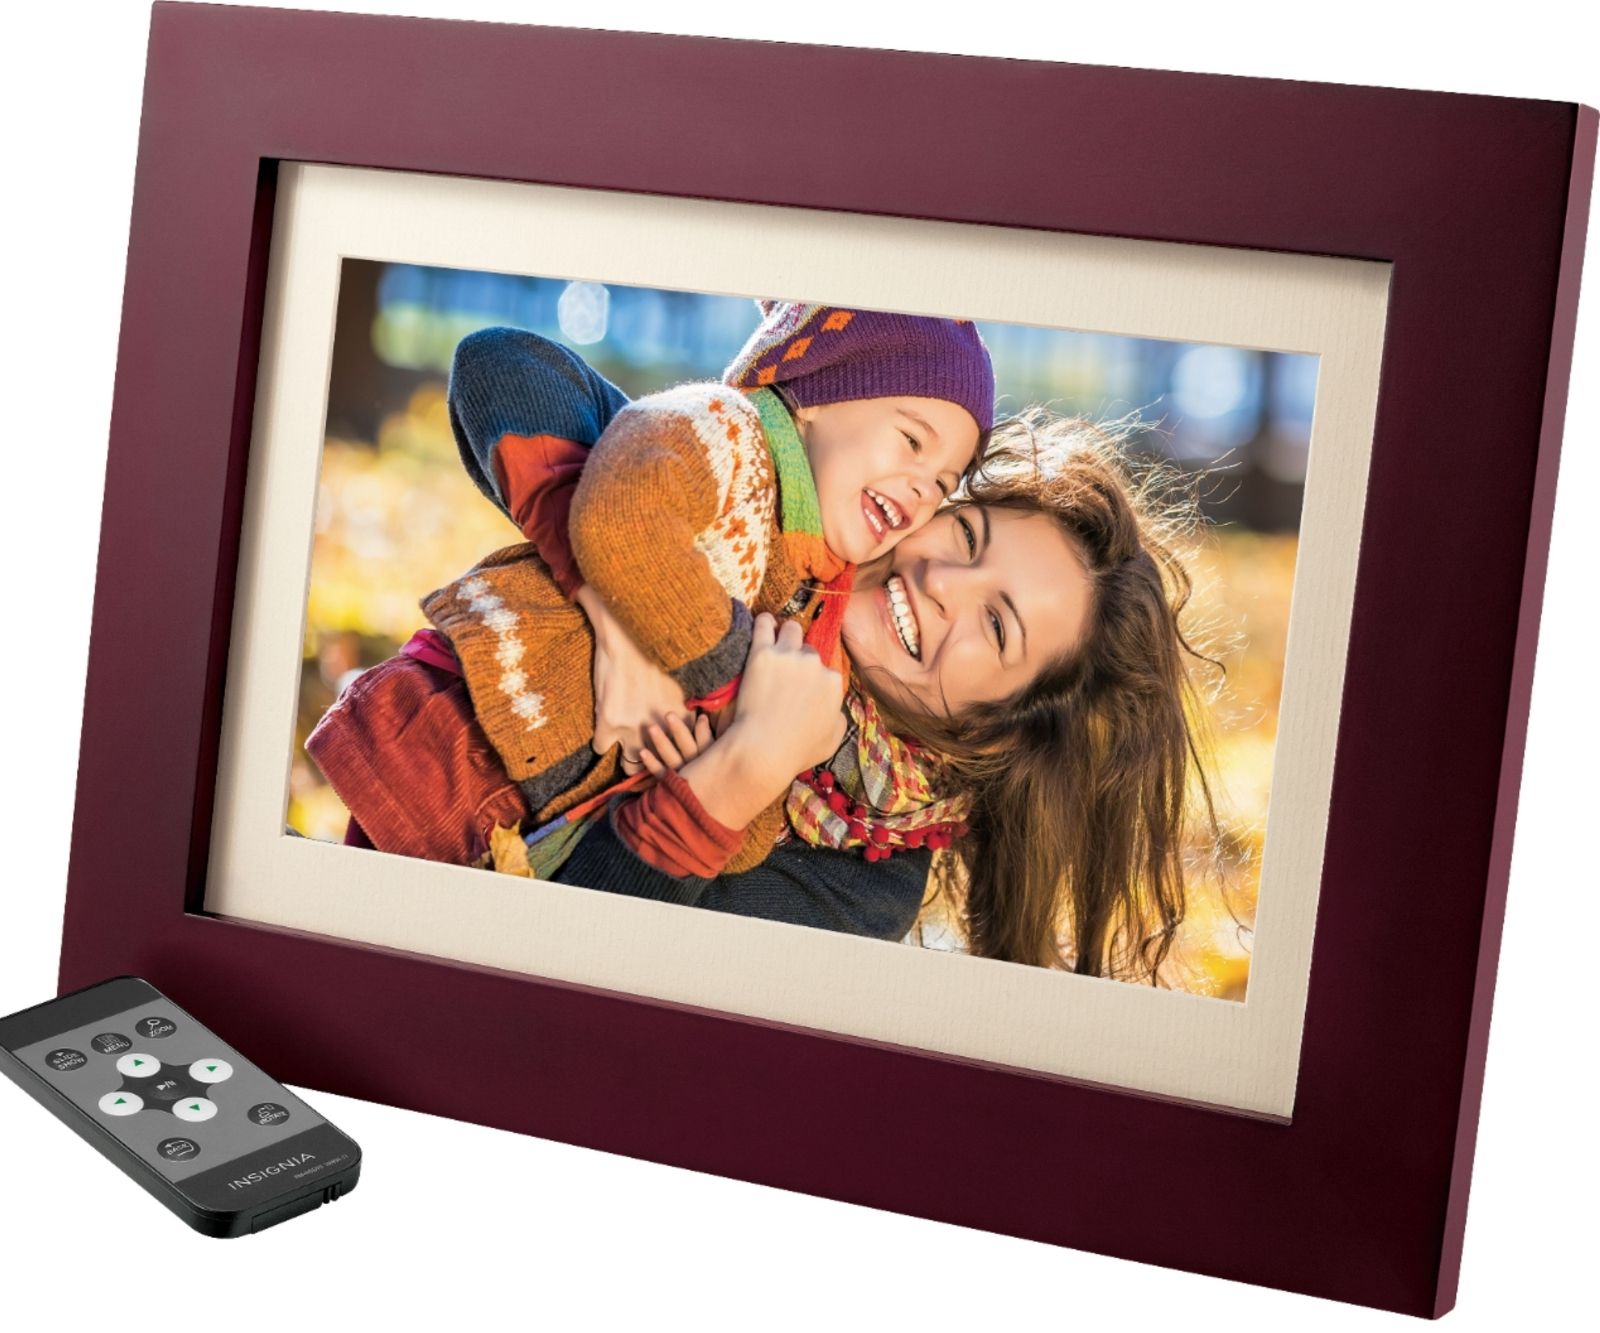  Dhwazz 10.1 Inch USB Digital Picture Frame, Non-WiFi SD Card  Smart Photo Frames IPS Screen HD Display with Remote Control, Support Video  and Music, Slideshow, Wall Mountable, Easy to use